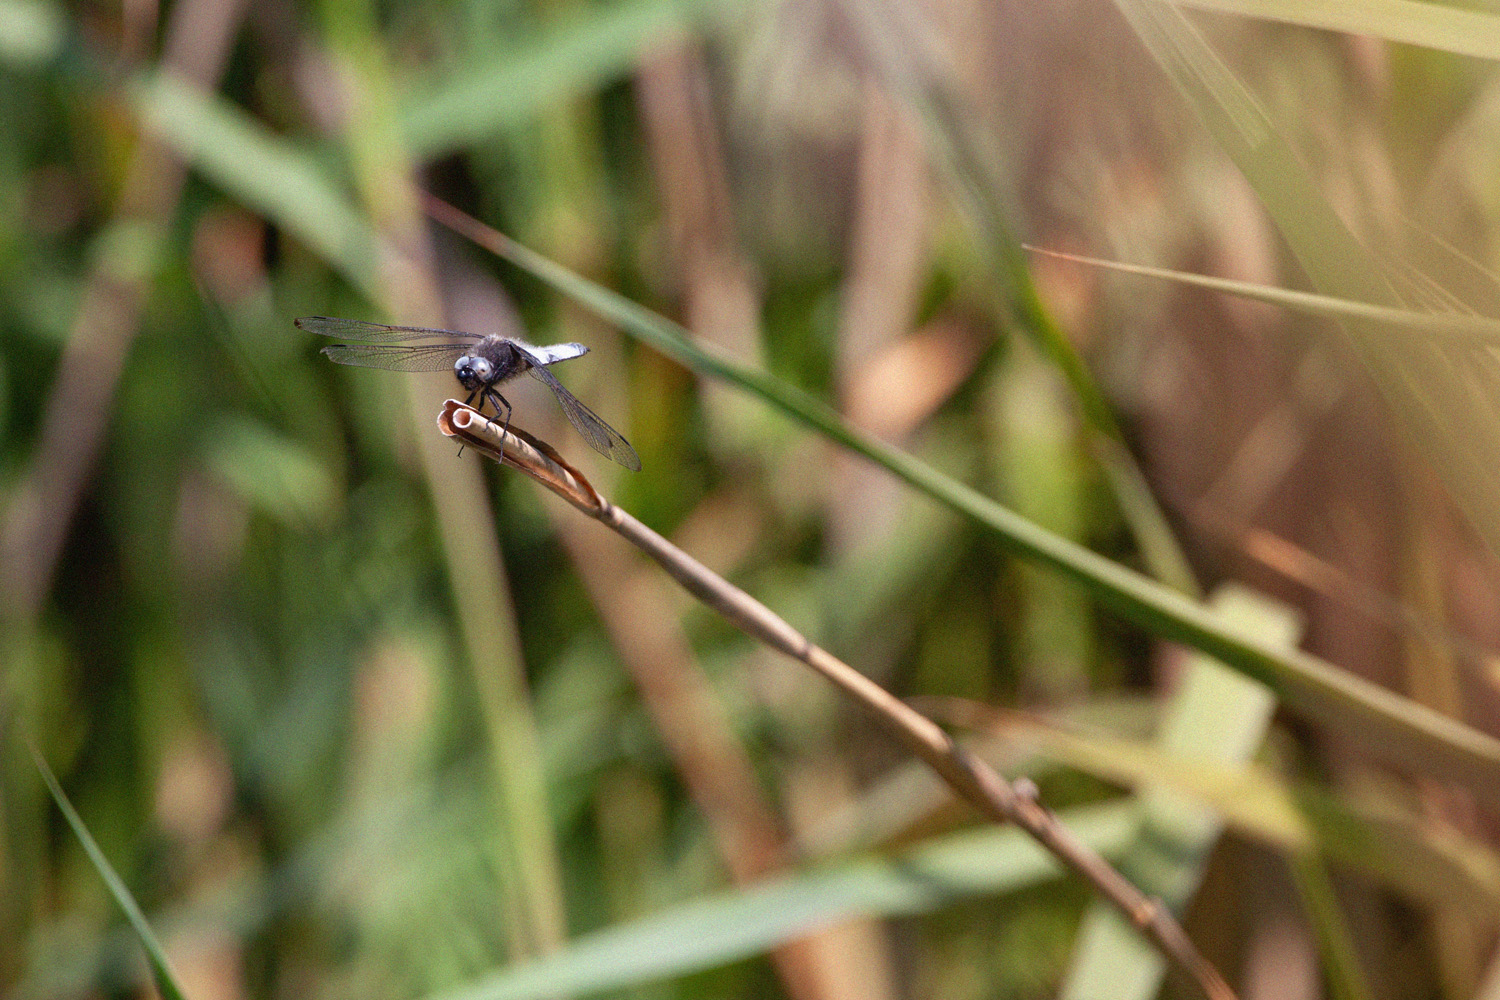 blue dragonfly perched on some reed